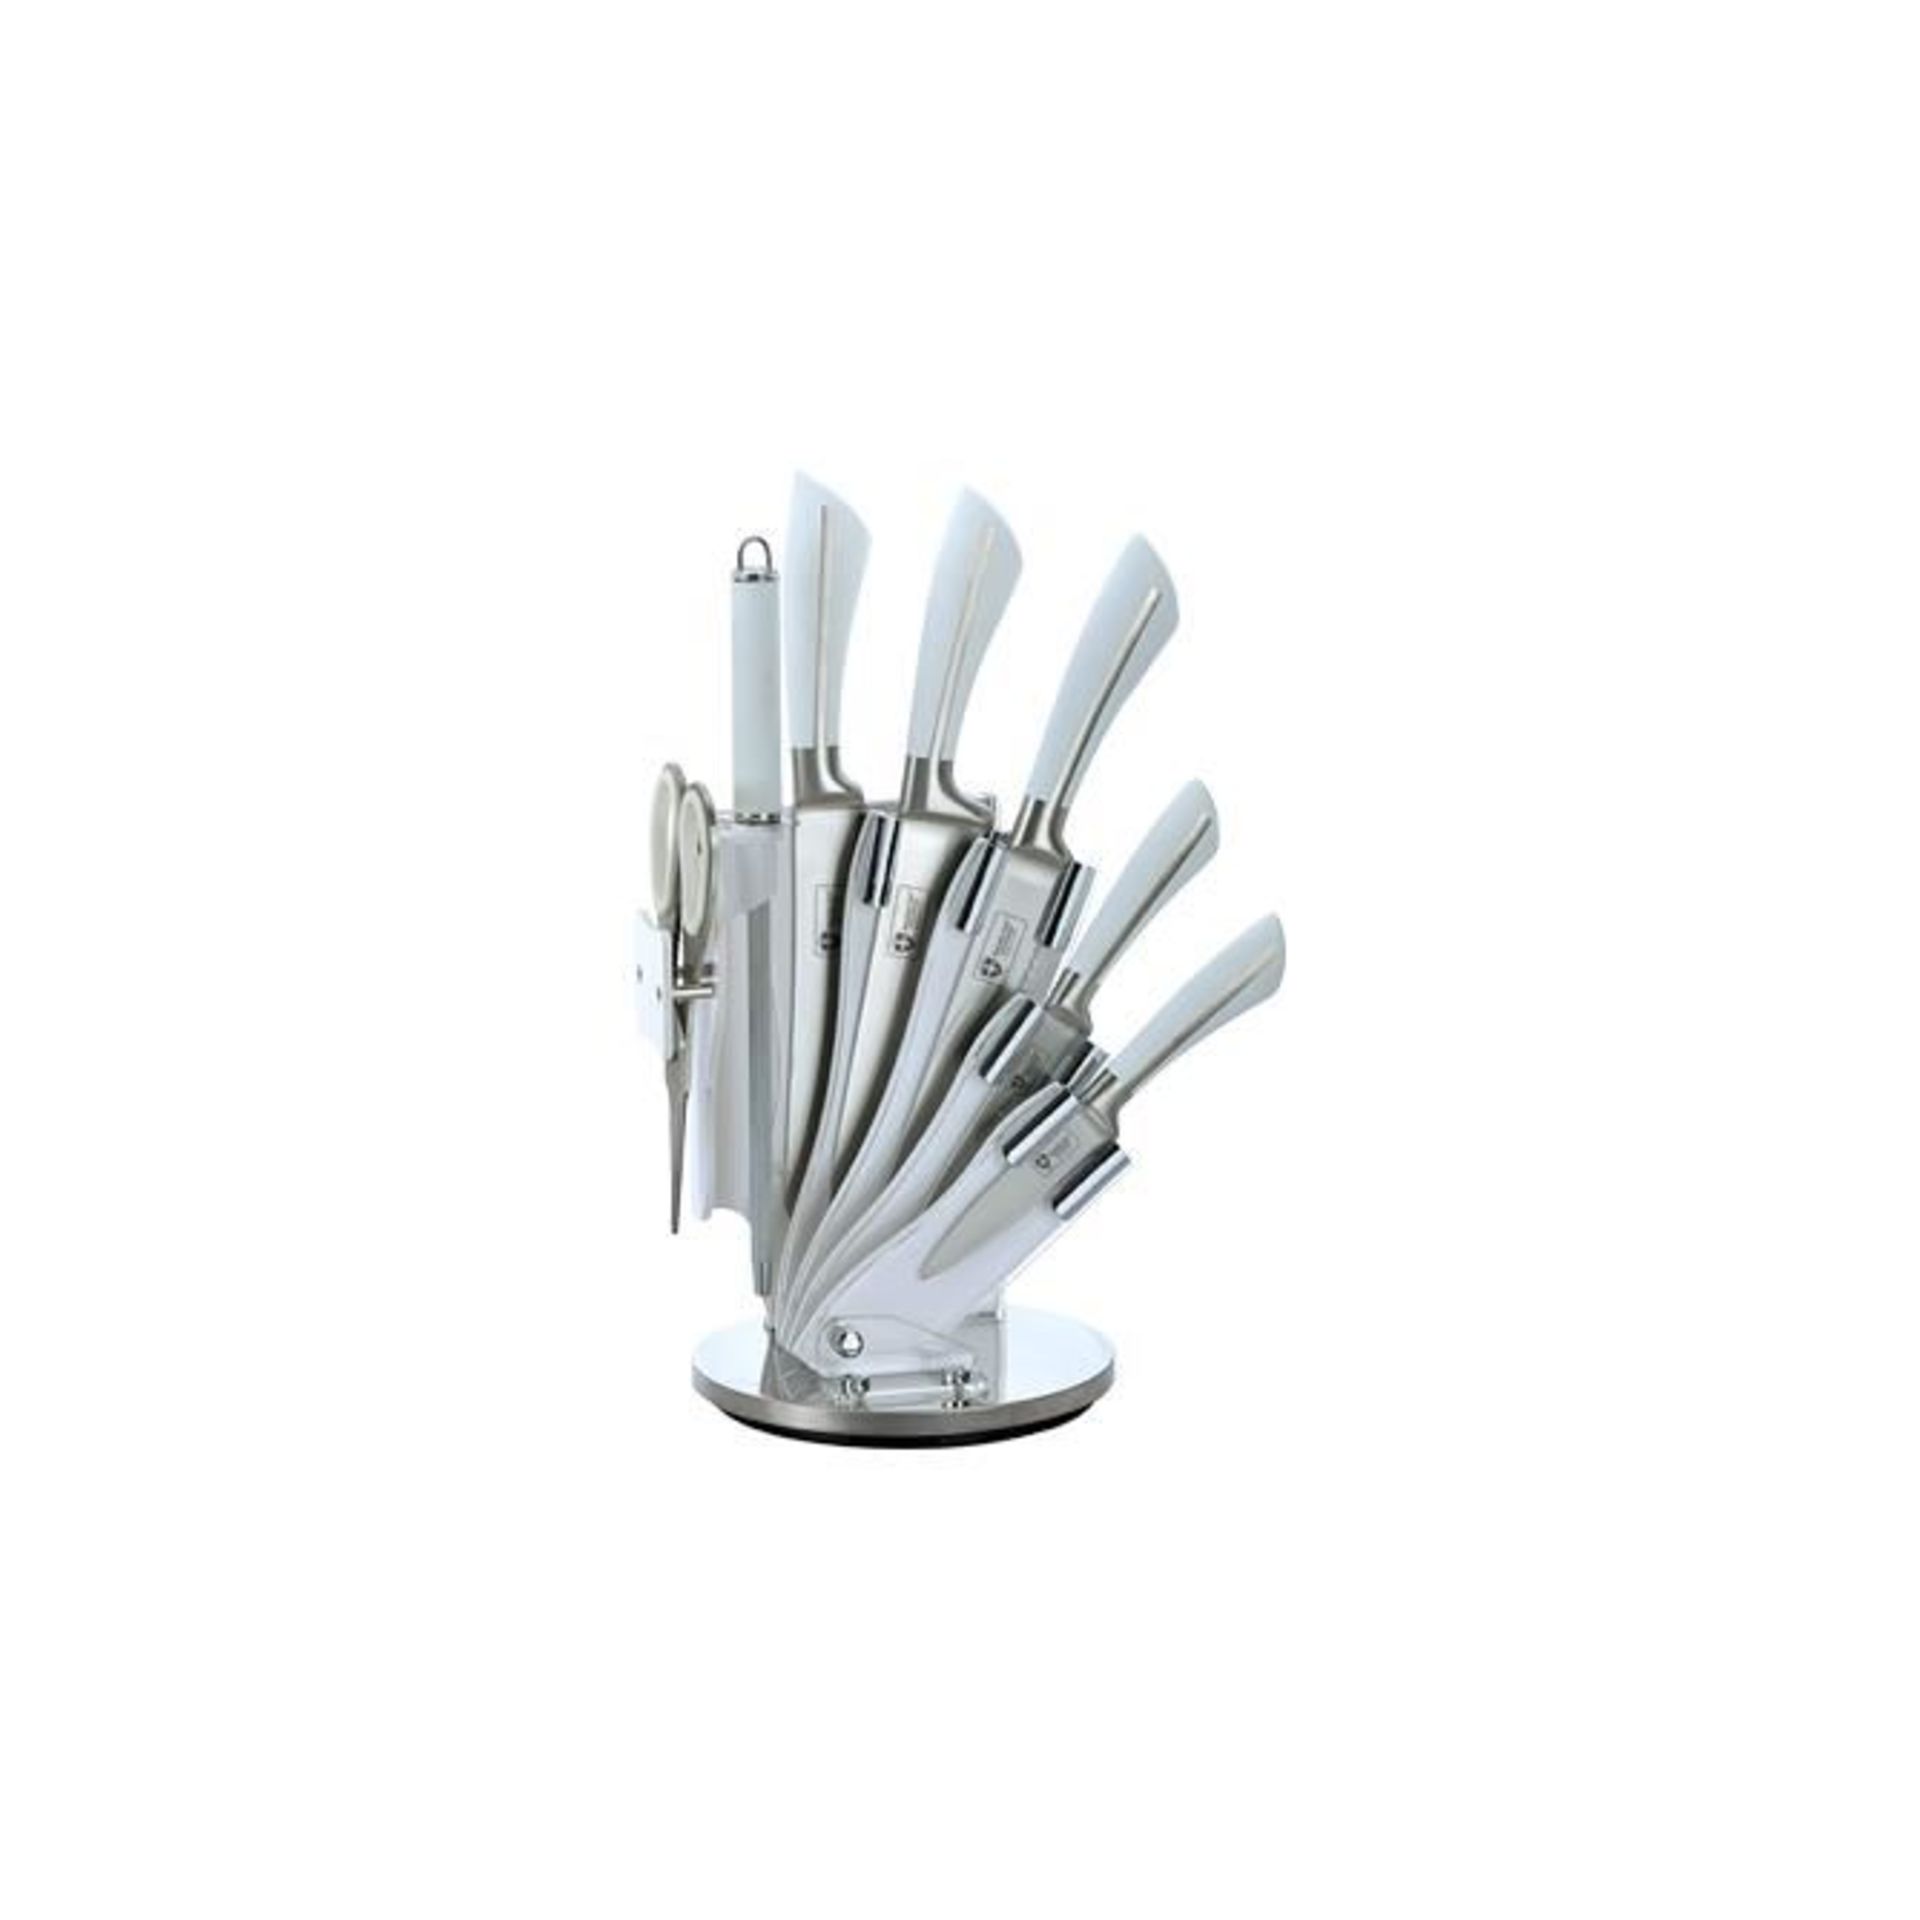 V 8pc Home Master Series Royalty Knife Set With Acrylic Stand RRP 99 euros